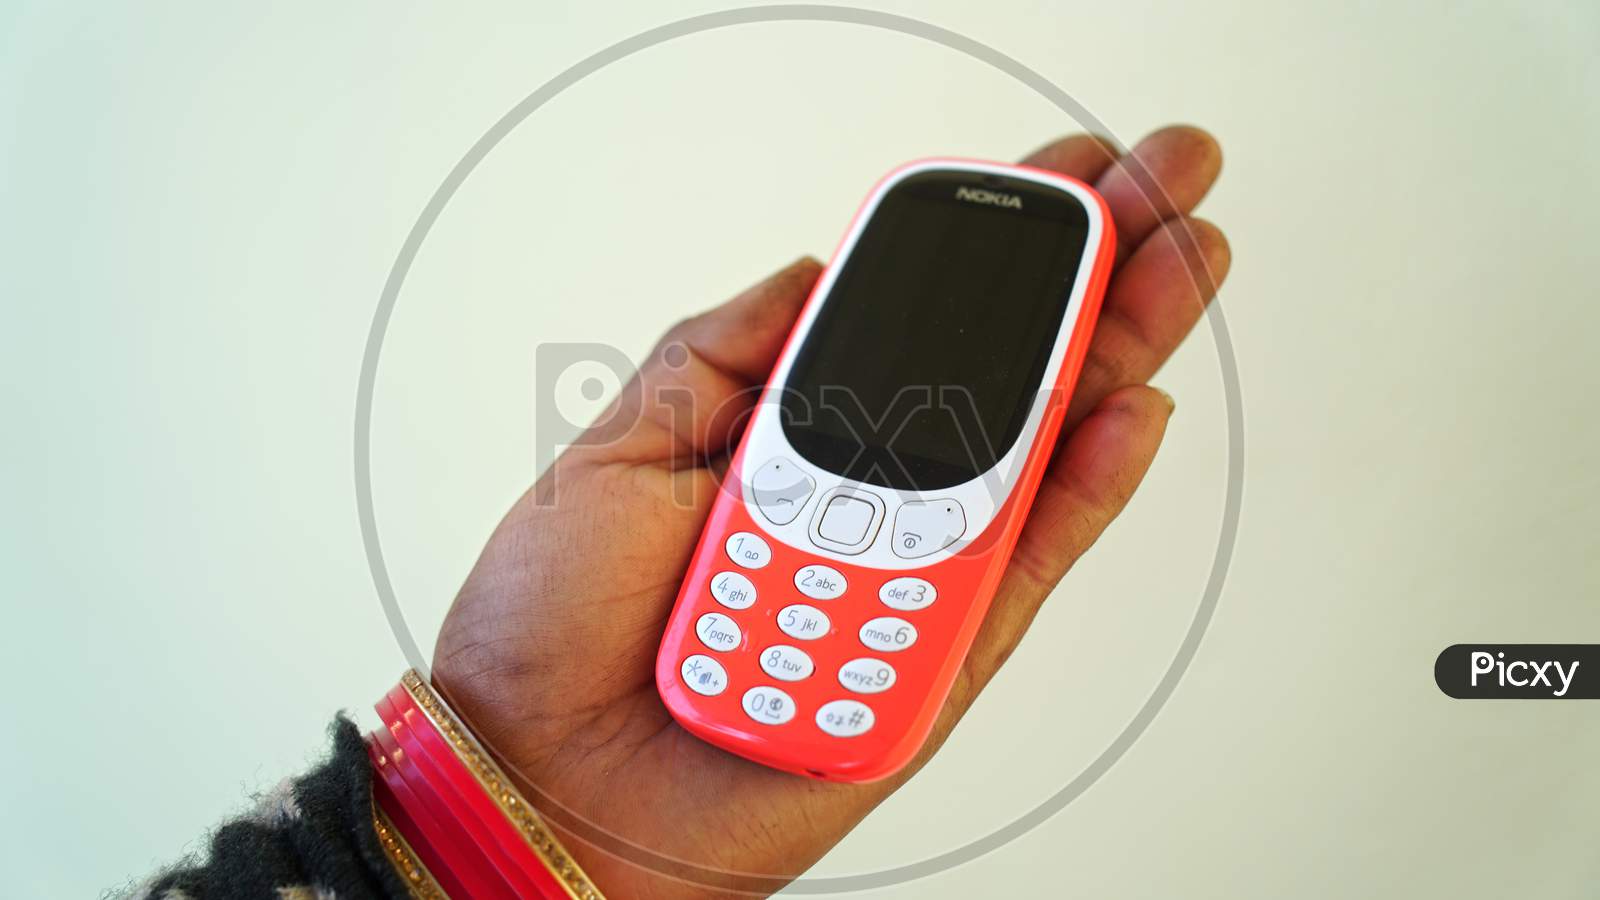 Old 2G Mobile Phone Holding In Woman Hand With Attractive Red Color. Modern Mobile Phone With Attractive Keypad.